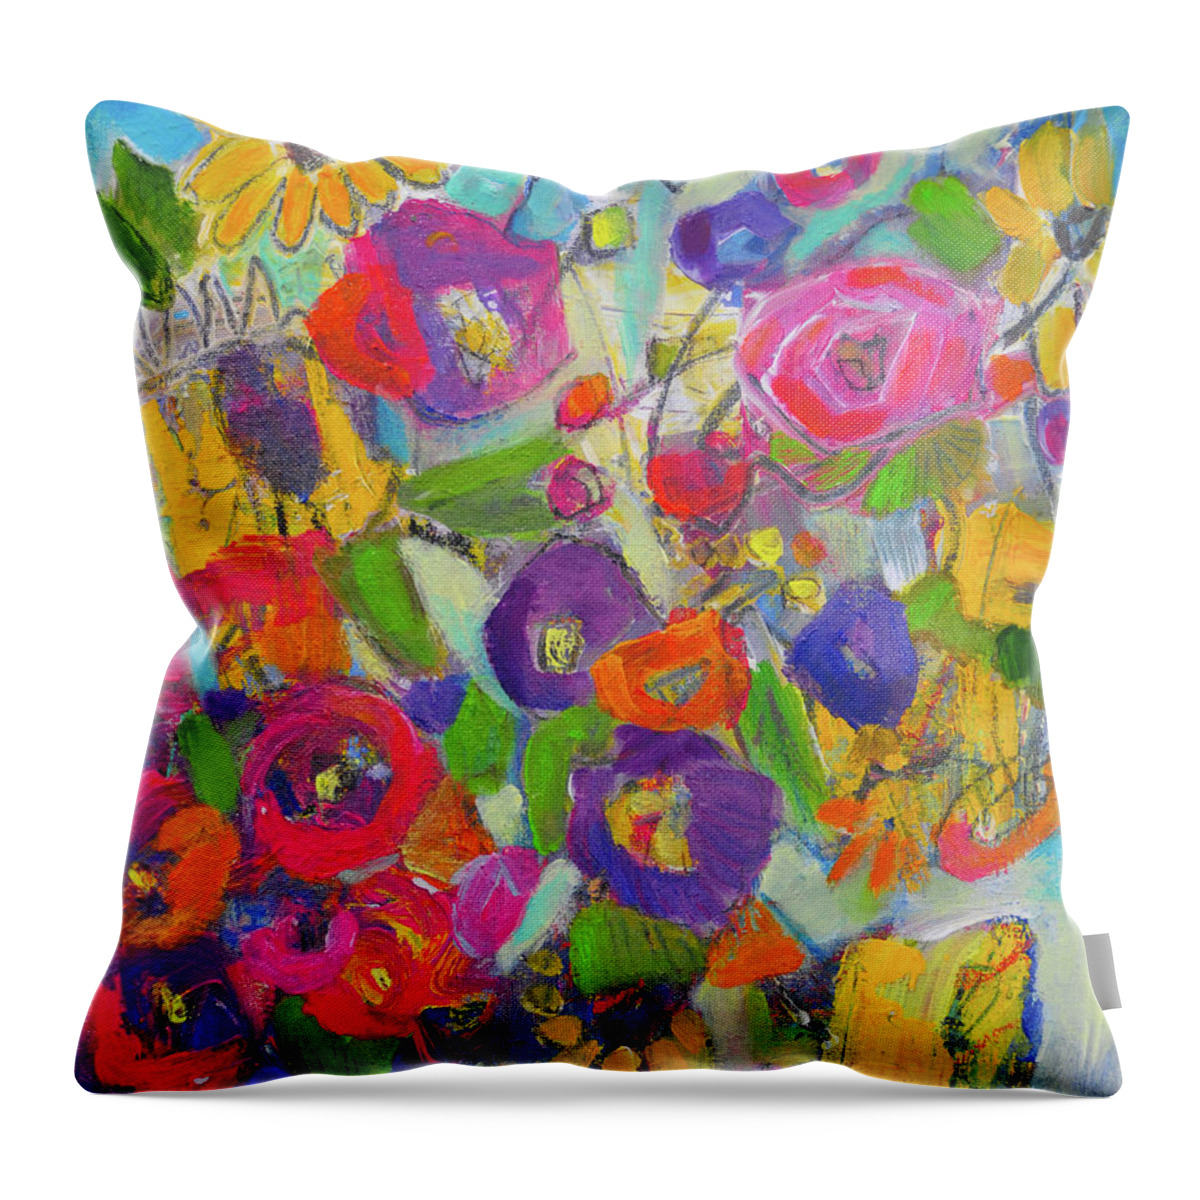 Floral Throw Pillow featuring the painting Colorful Autumn Bouquet by Haleh Mahbod